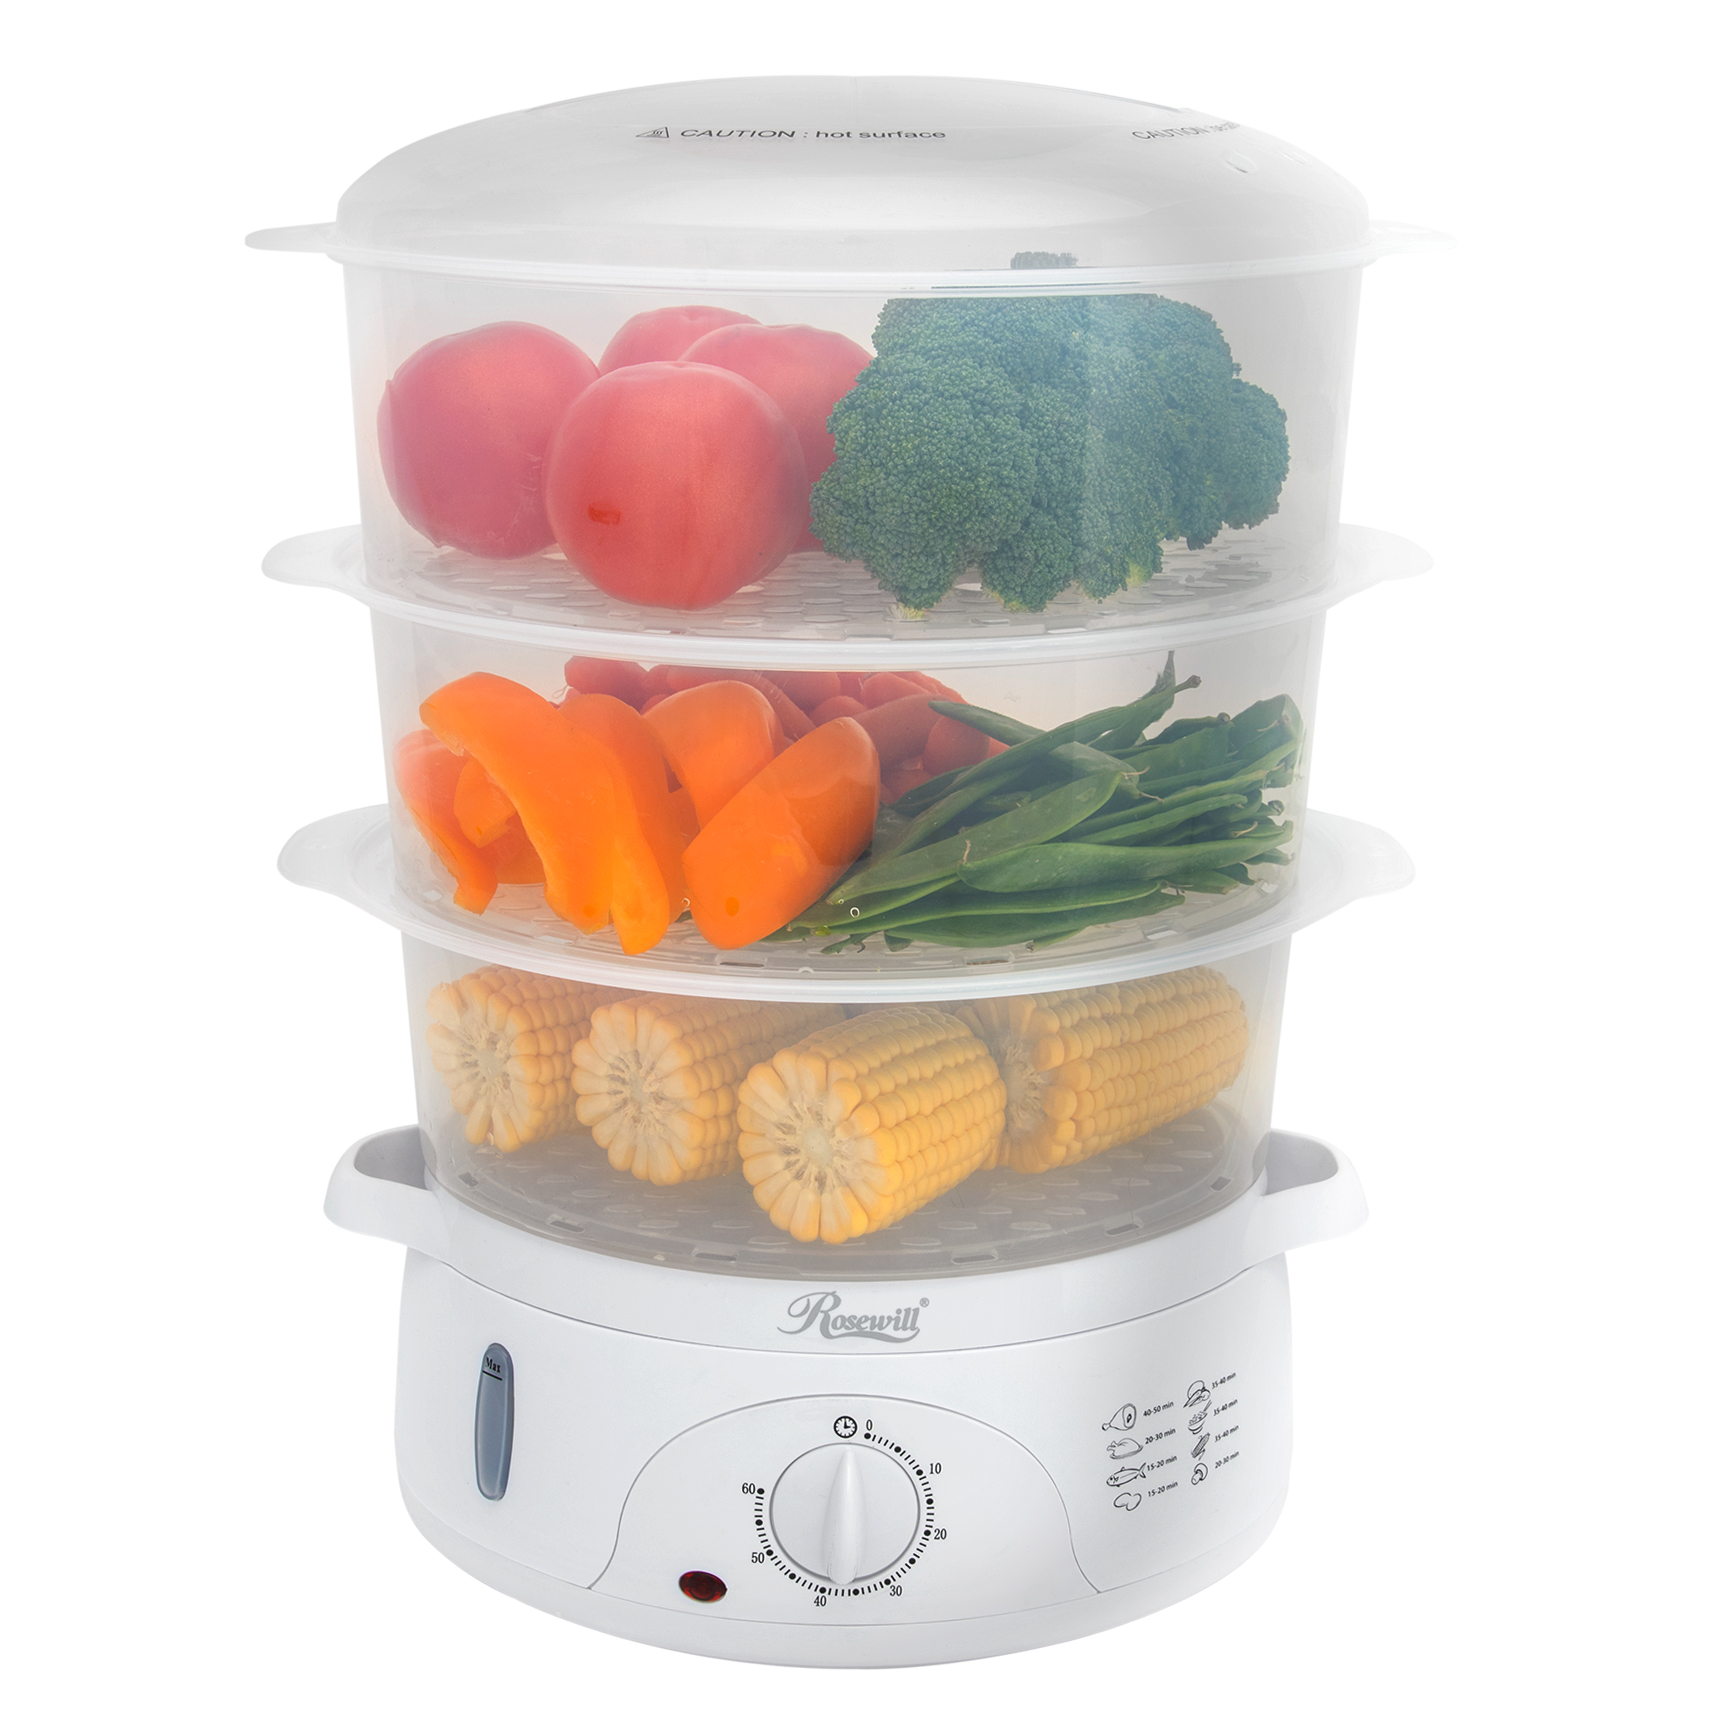 Rosewill Electric Food Steamer 9.5 Quart, Vegetable Steamer and Rice Cooker with BPA Free 3 Tier Stackable Baskets and Egg Holders RHST-15001 - image 1 of 5